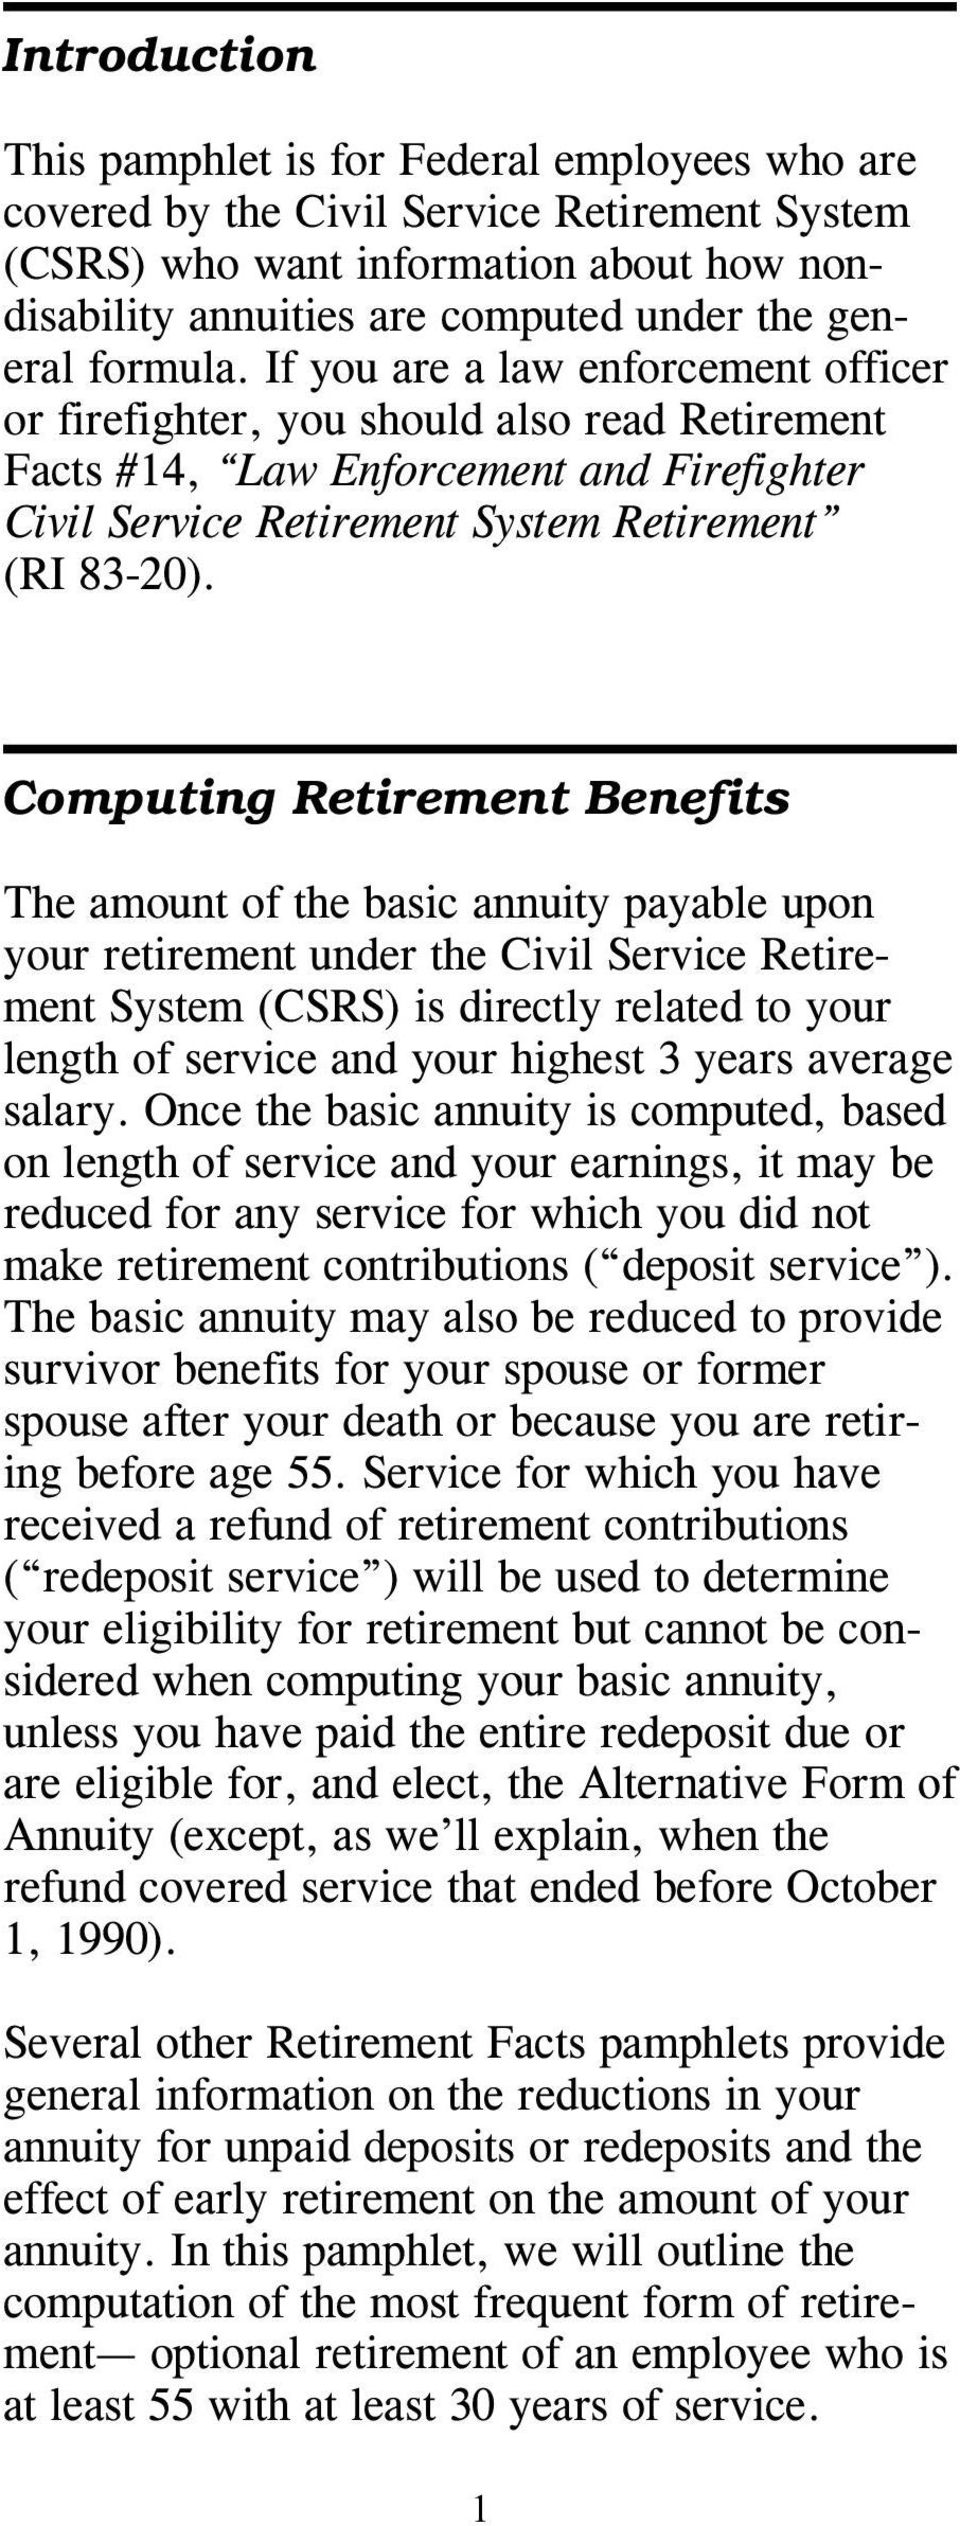 Computing Retirement Benefits The amount of the basic annuity payable upon your retirement under the Civil Service Retirement System (CSRS) is directly related to your length of service and your